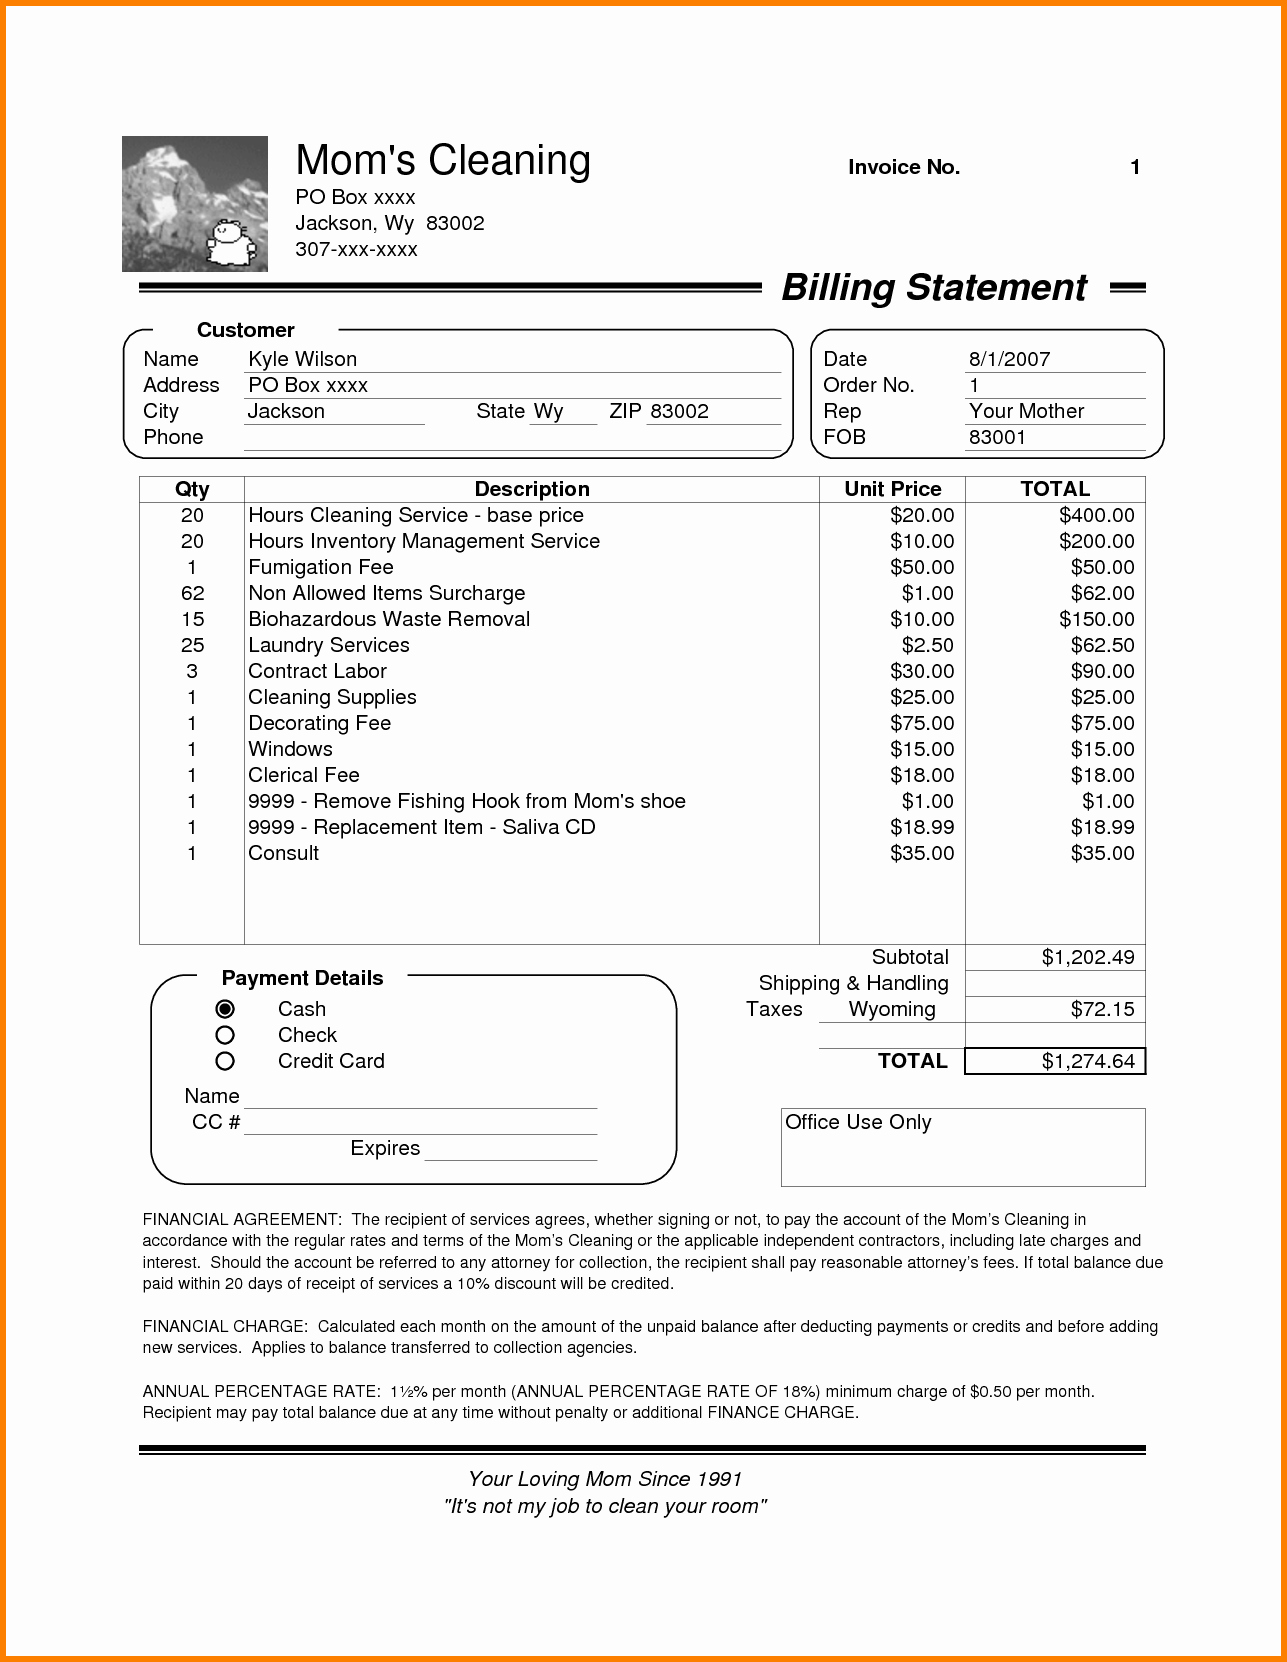 Invoice Template for Cleaning Services Inspirational Cleaning Invoice Example